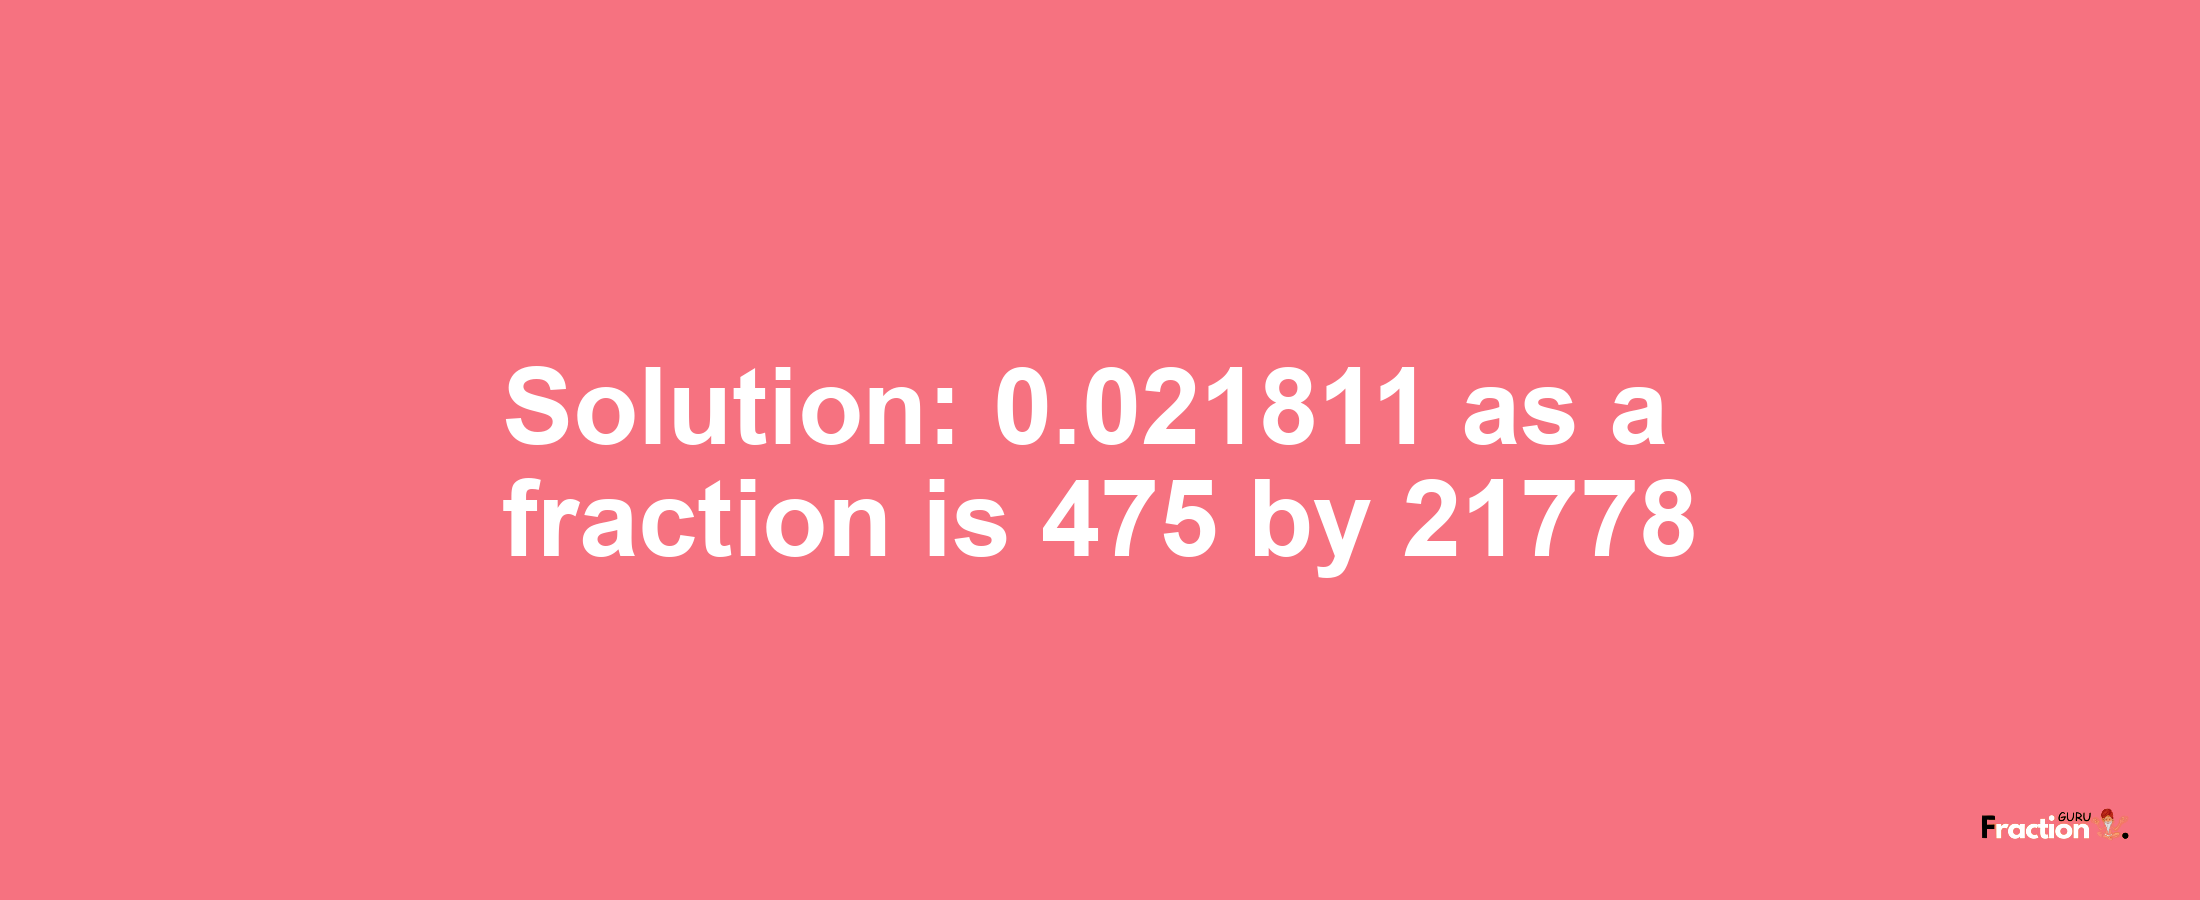 Solution:0.021811 as a fraction is 475/21778